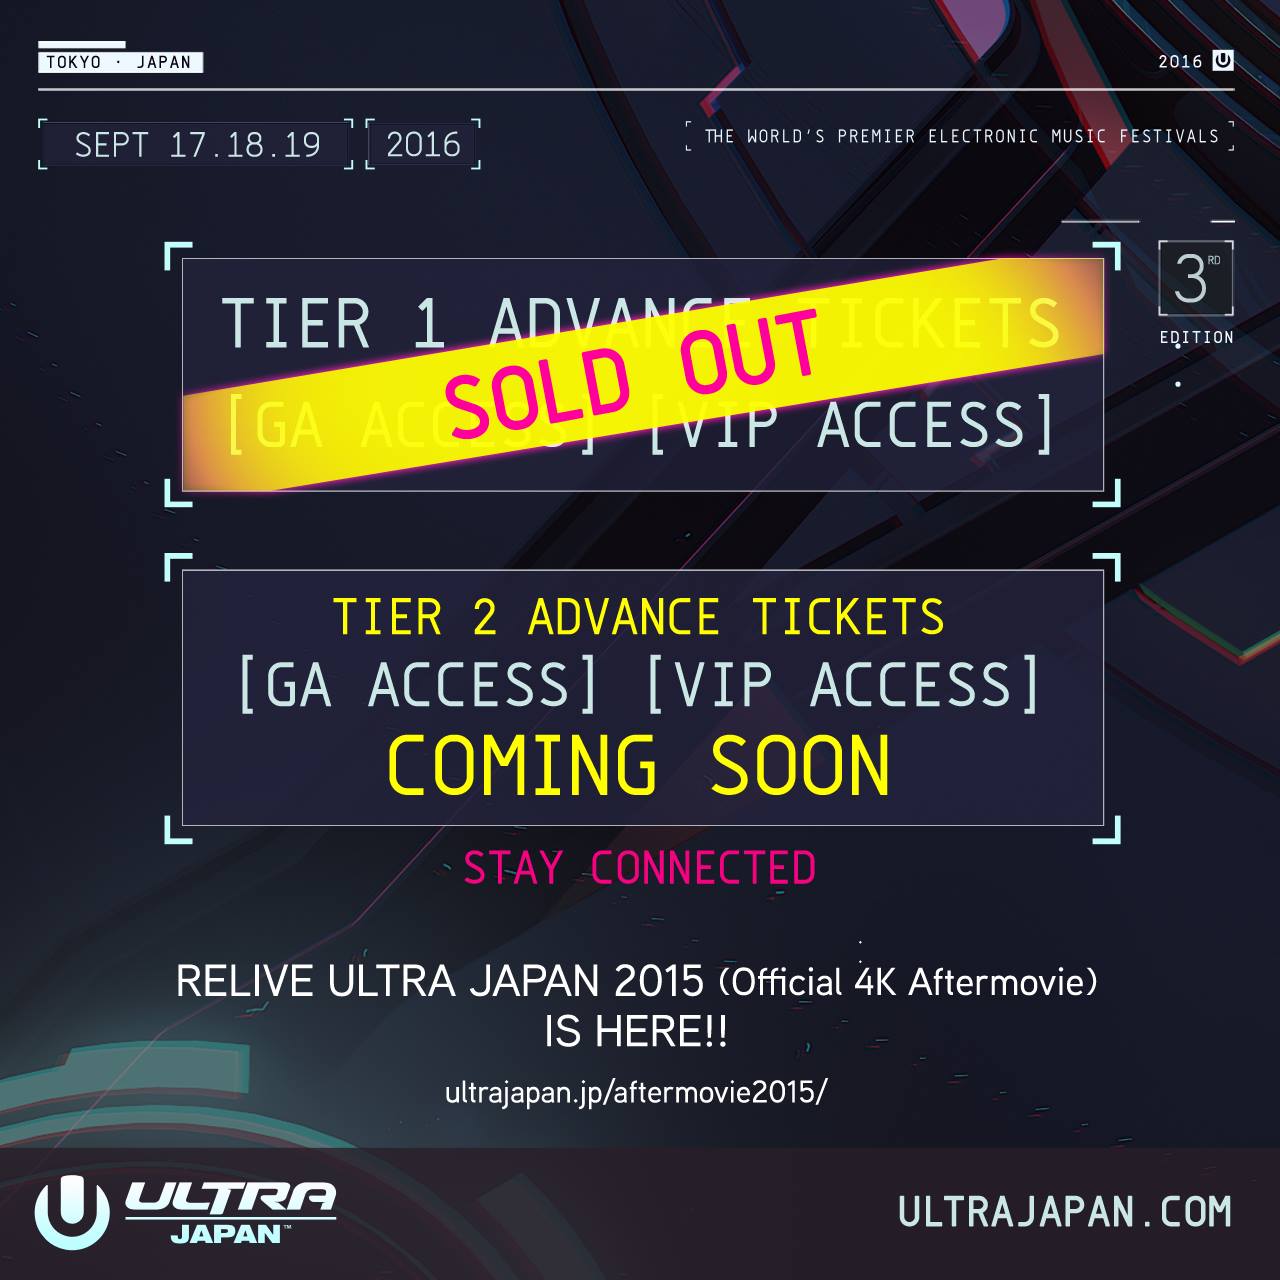 TIER1 ADVANCE TICKETS ALL SOLD OUT